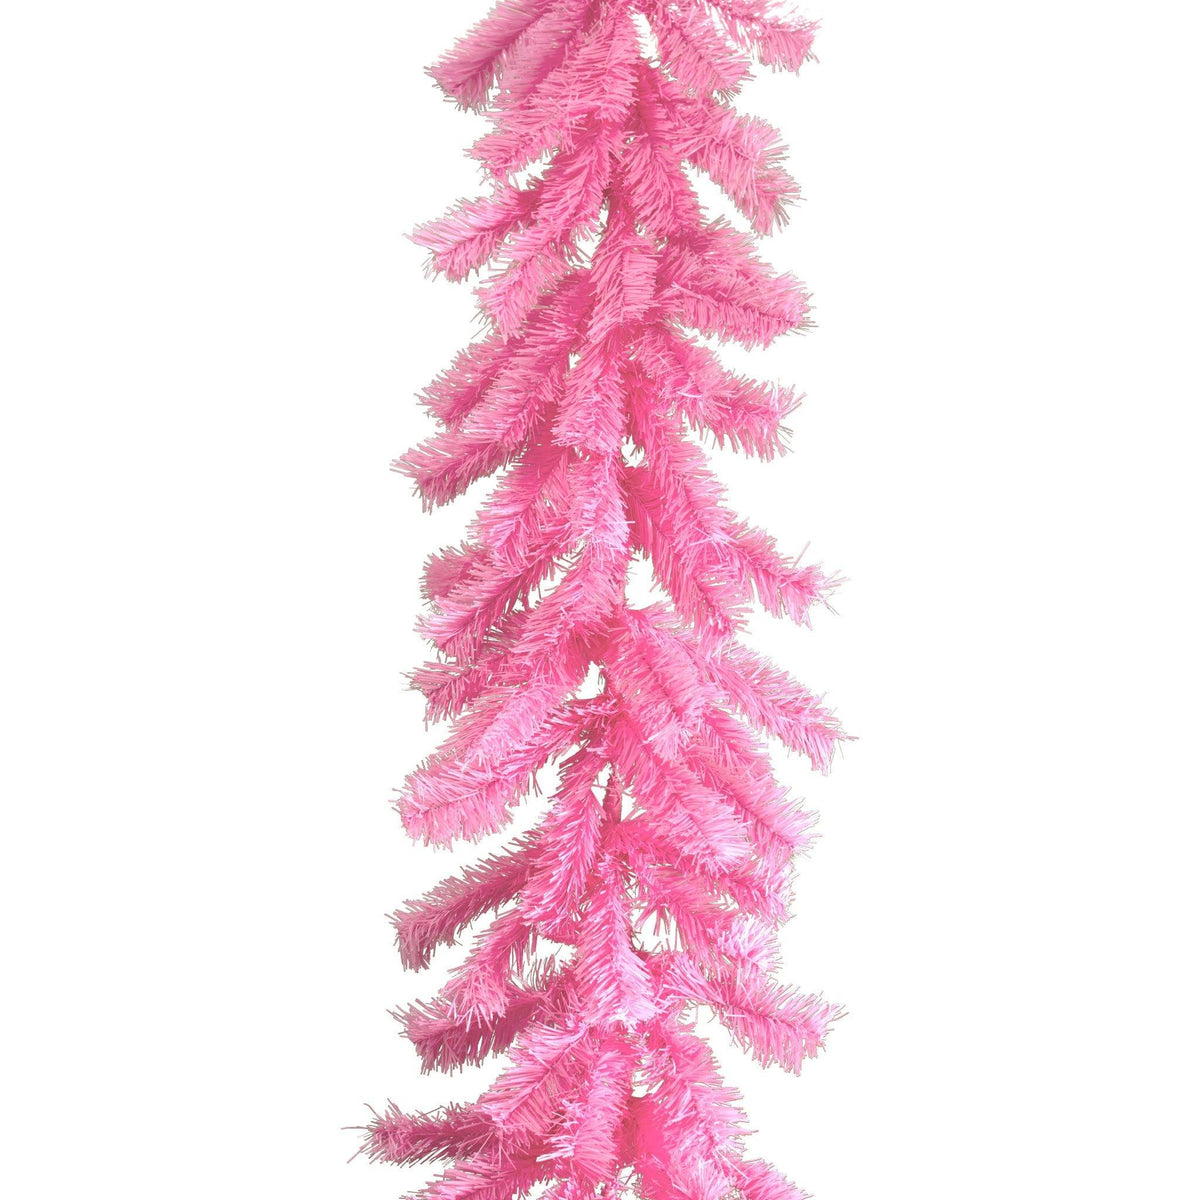 Shop for Lee Display's brand new 6FT Pink Tinsel Brush Garlands on sale at leedisplay.com.  Come in 6FT Lengths